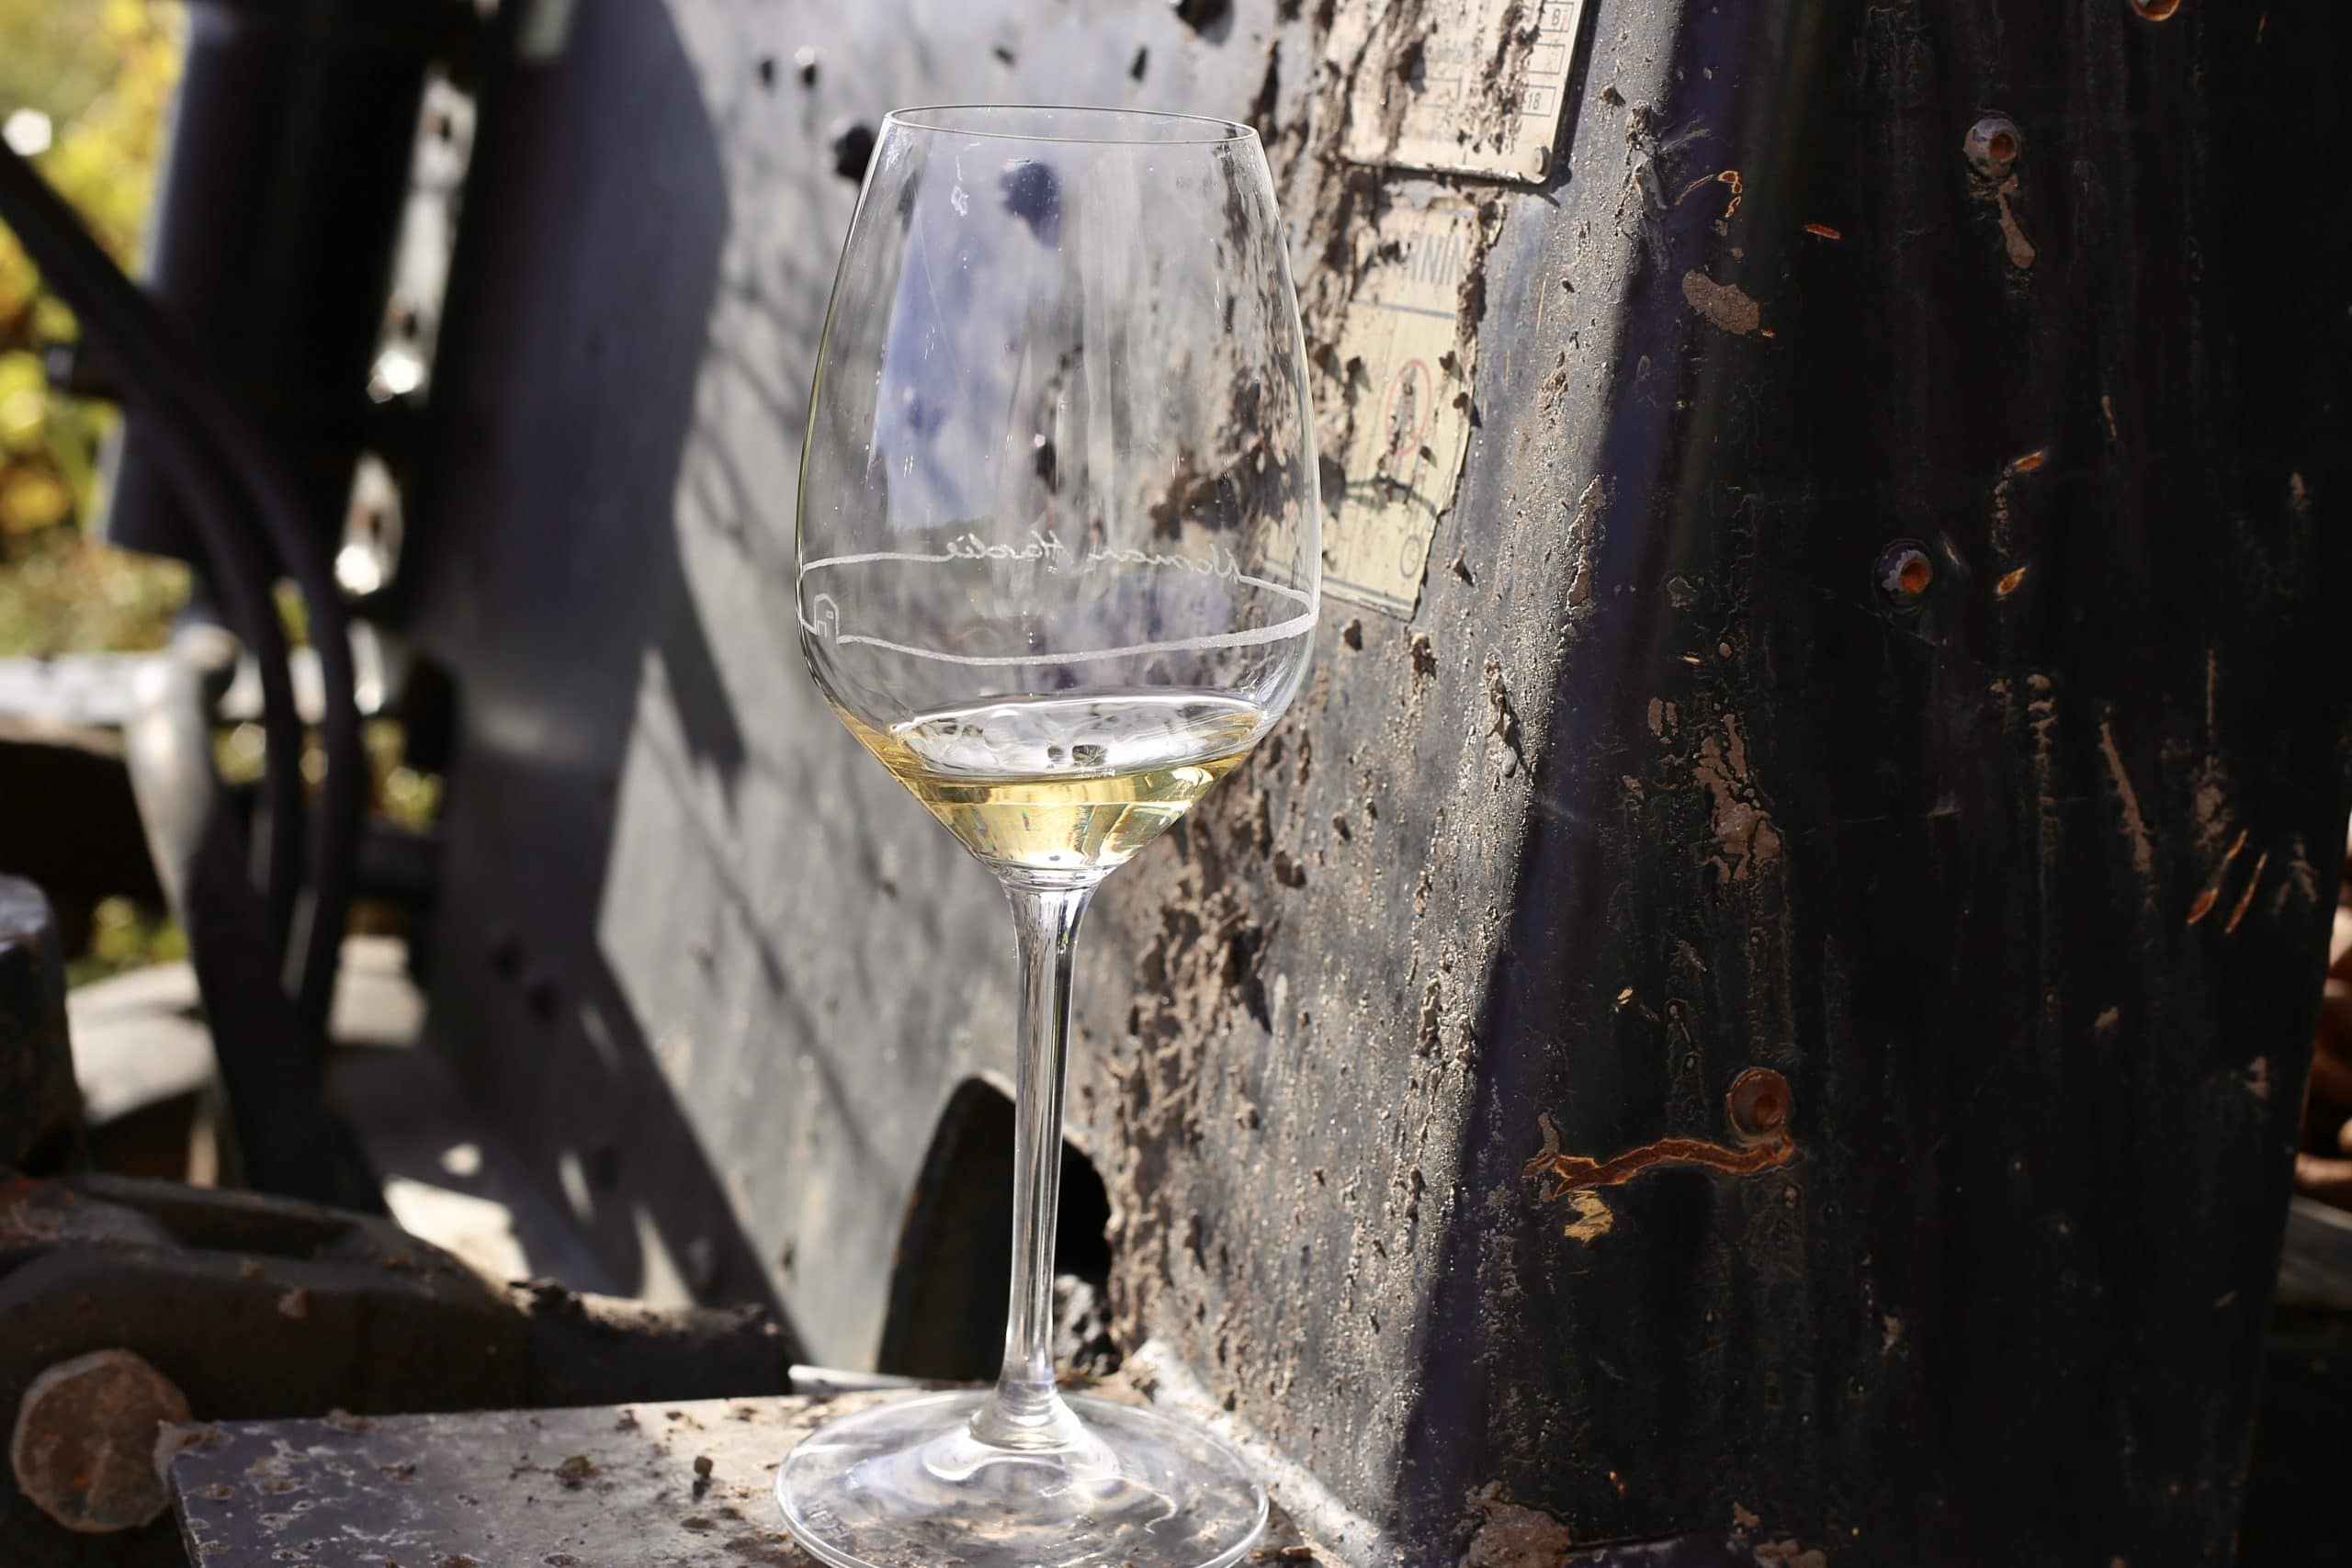 A glass of Chardonnay, Norman Hardie Winery, Prince Edward County